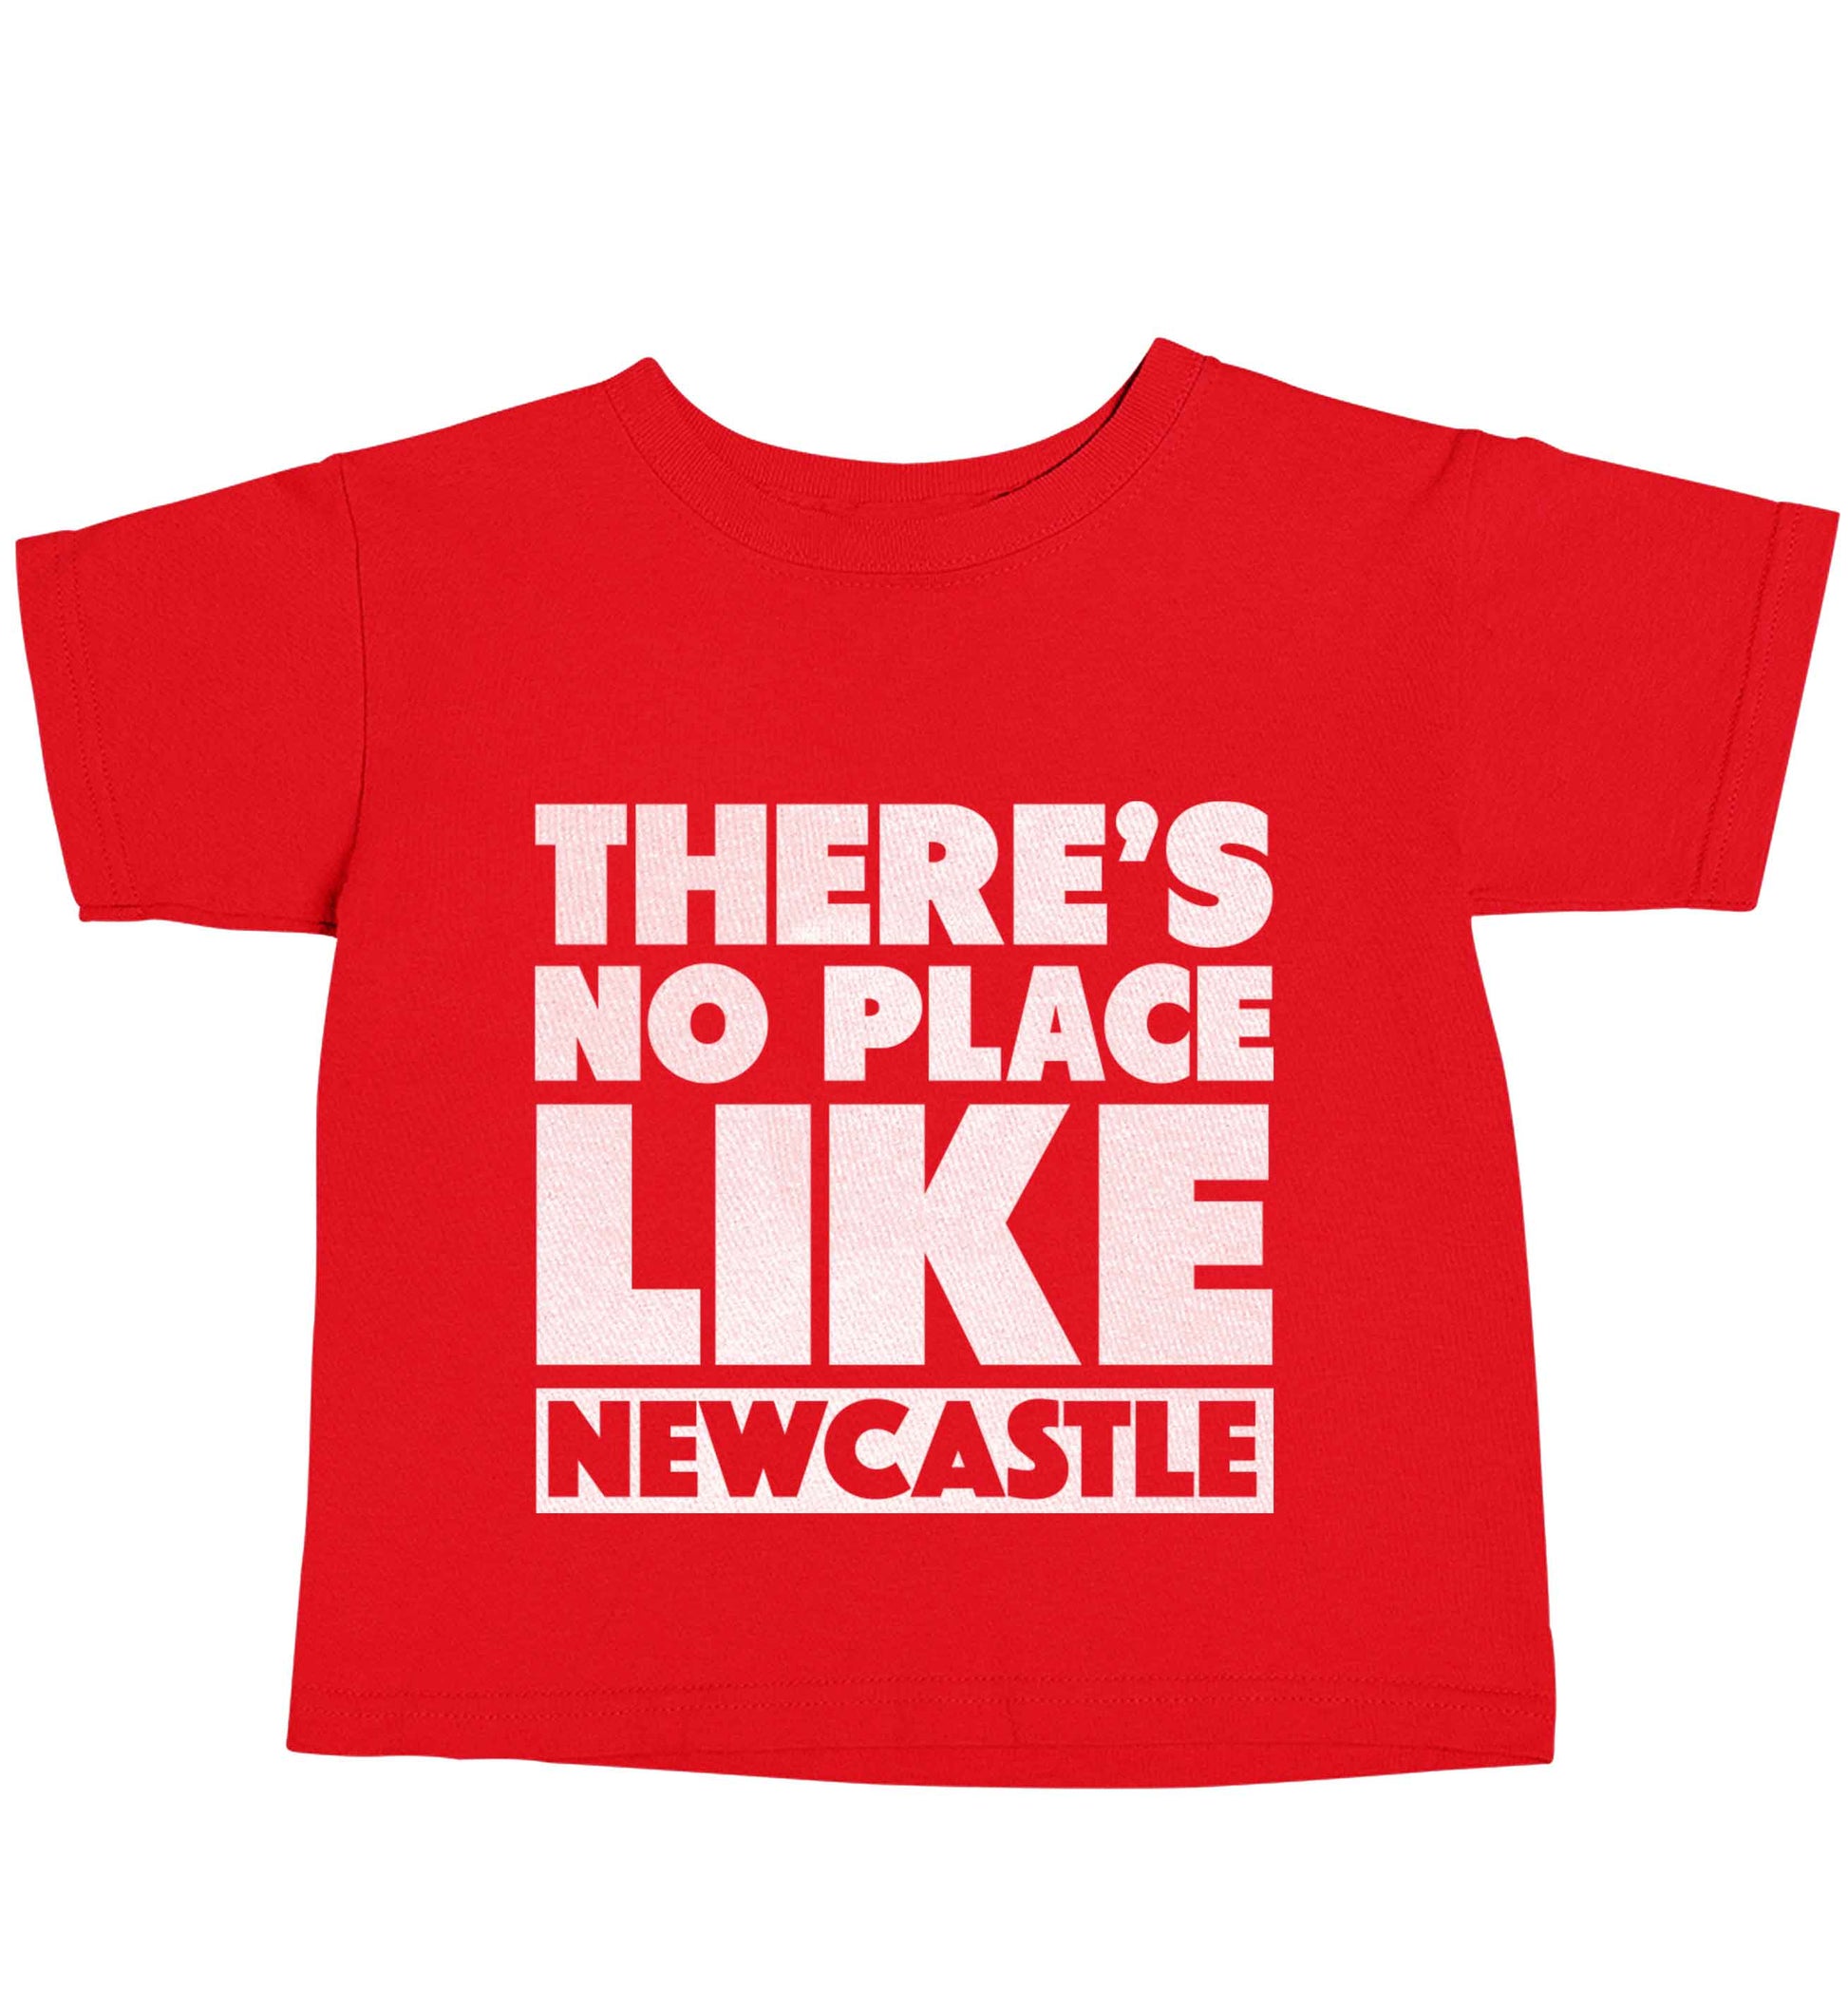 There's no place like Newcastle red baby toddler Tshirt 2 Years